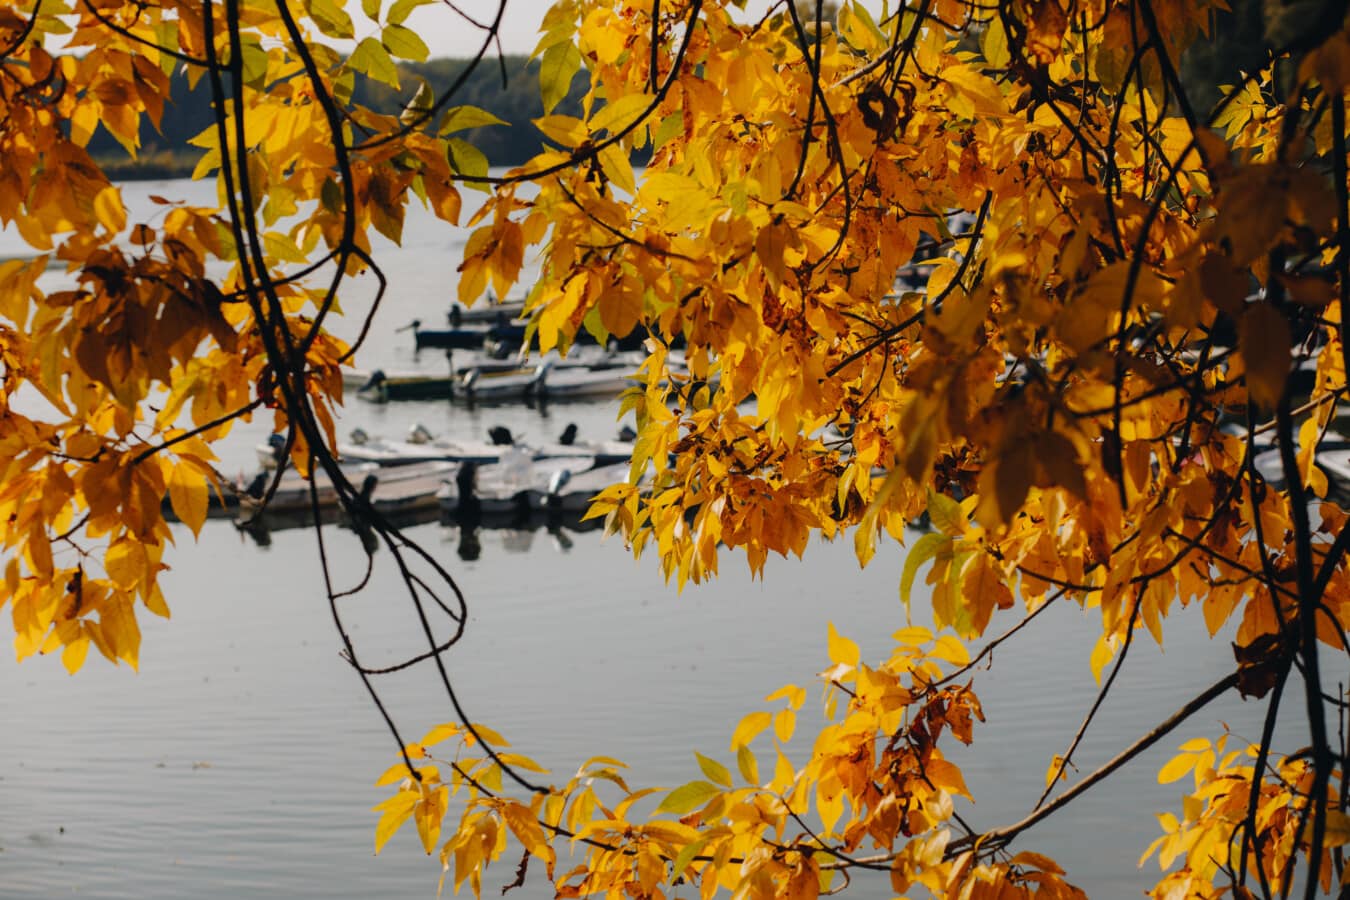 branches, autumn, boats, harbor, tree, season, plant, leaves, leaf, nature